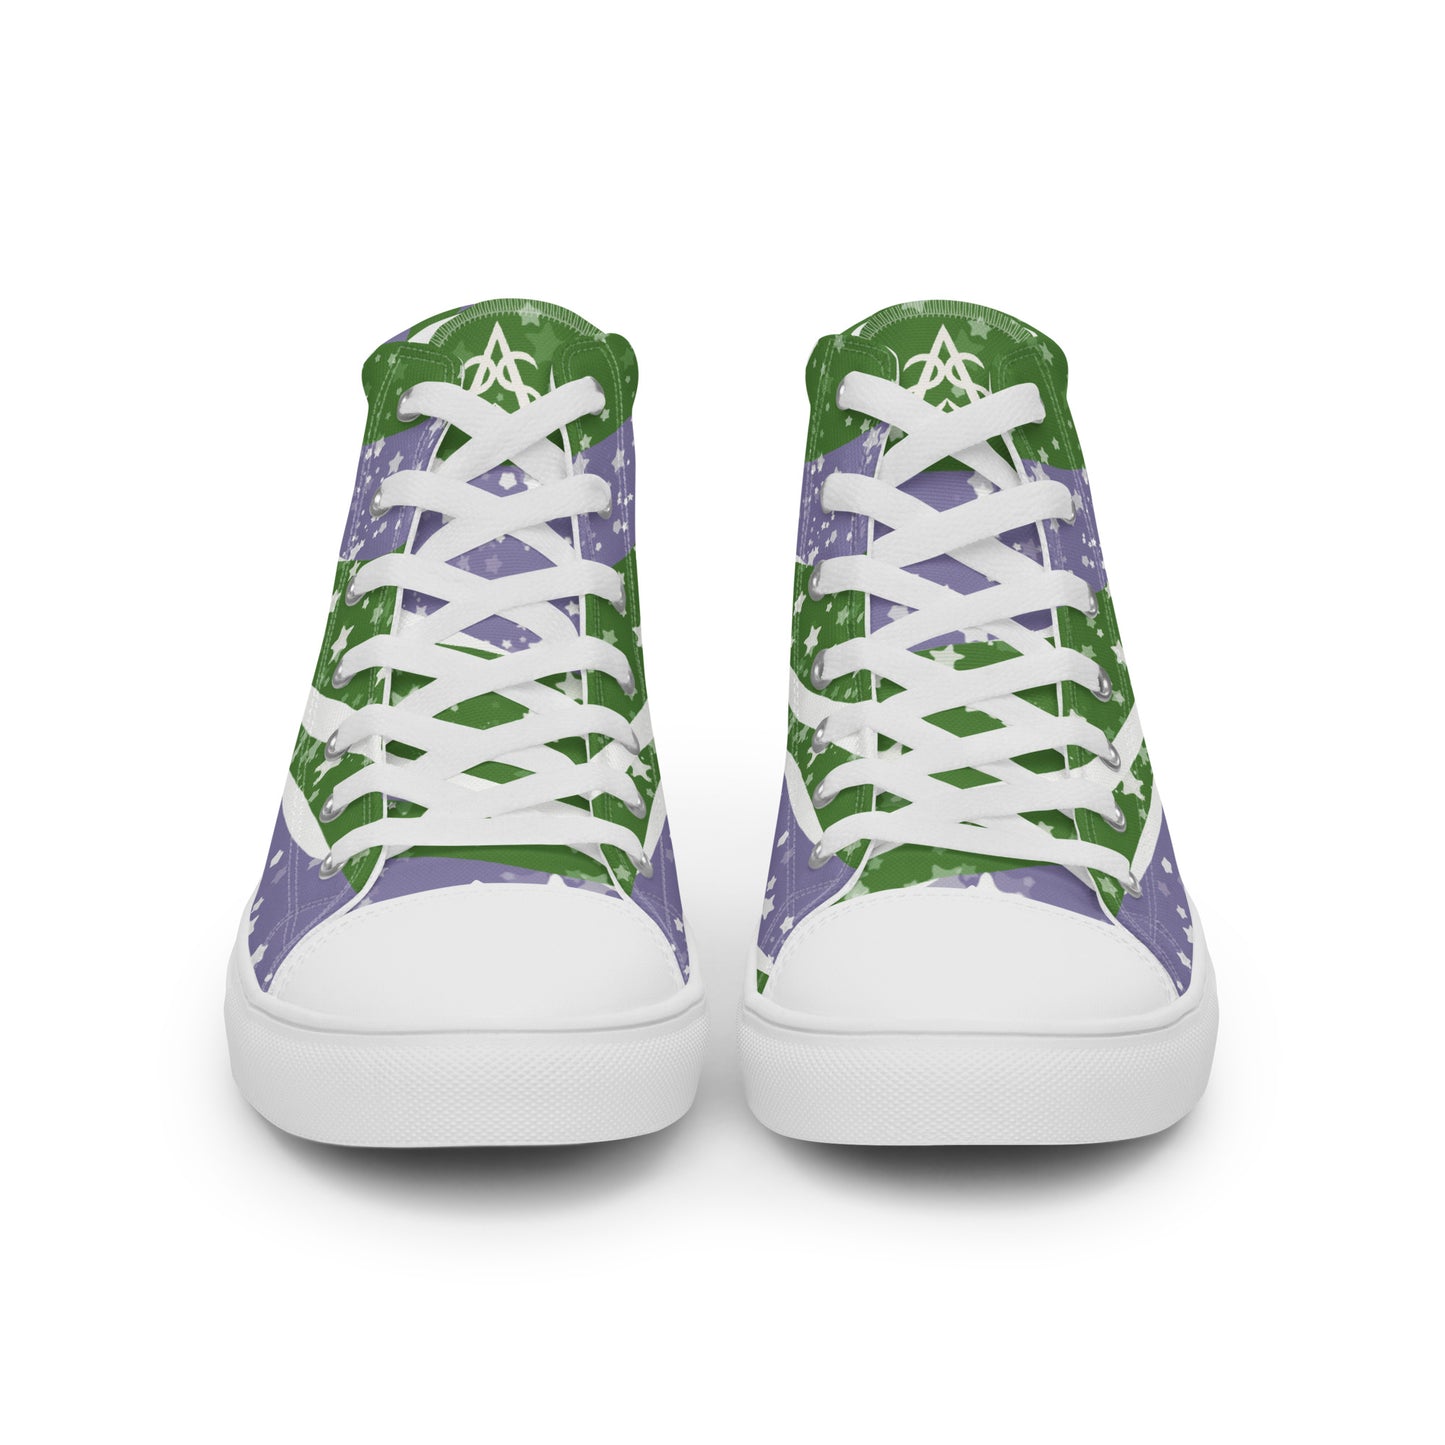 Front view: a pair of high top shoes with green, purple, and white ribbons that get larger from heel to laces, white stars, and the Aras Sivad logo on the tongue.